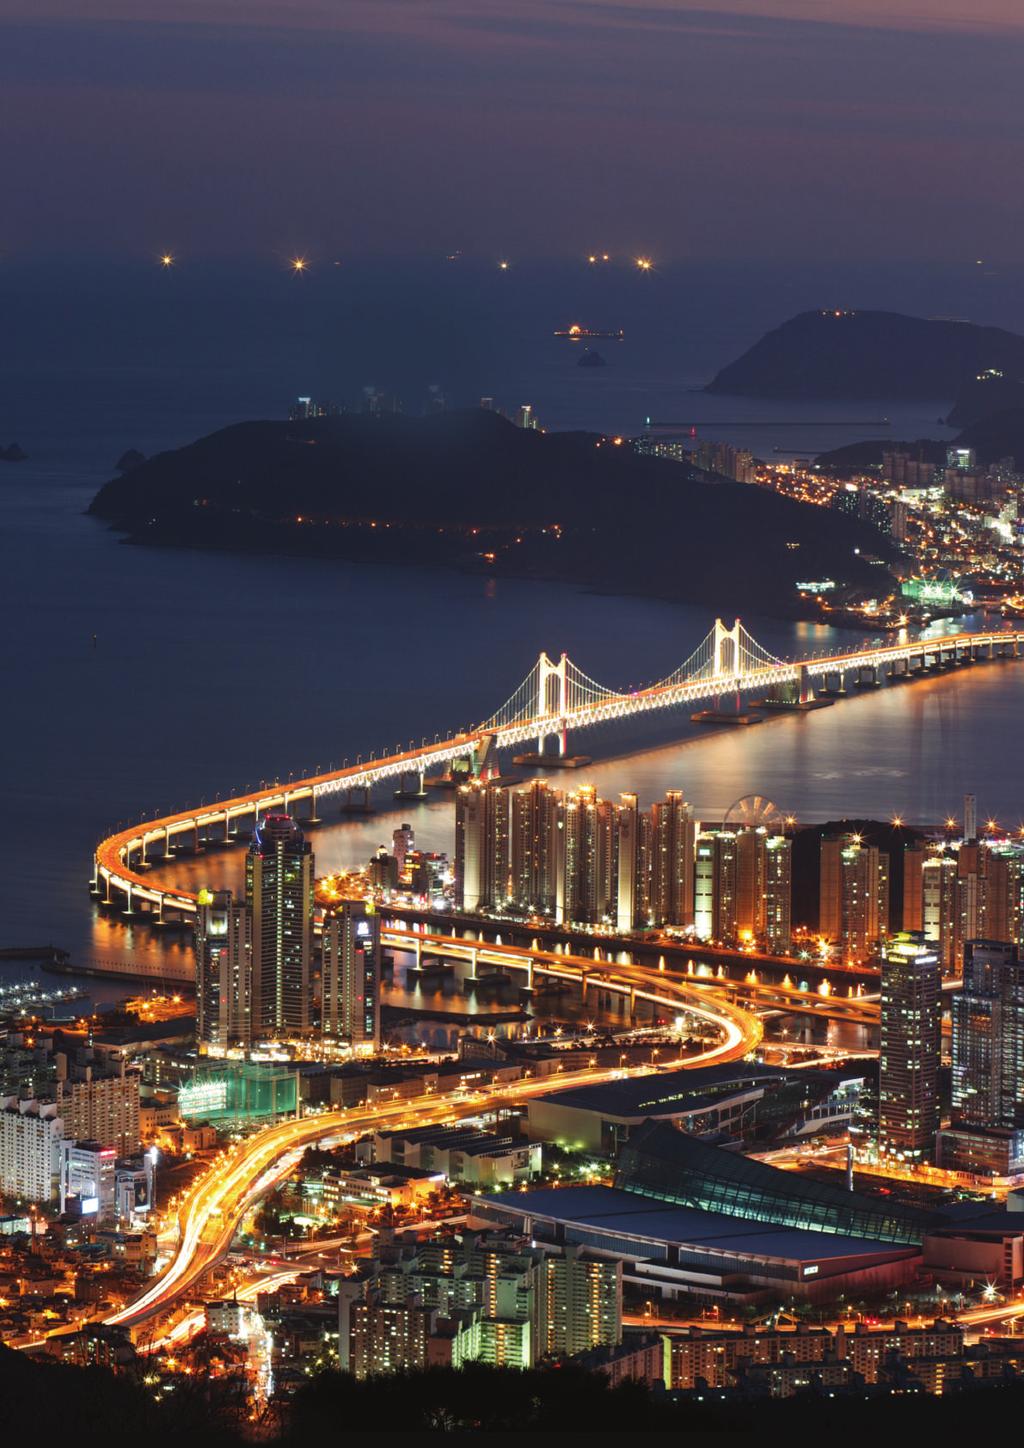 BUSAN Second largest city where located on the southeastern tip of Korea 5th largest port city in the world(the logistics hub of northeast asia) No.